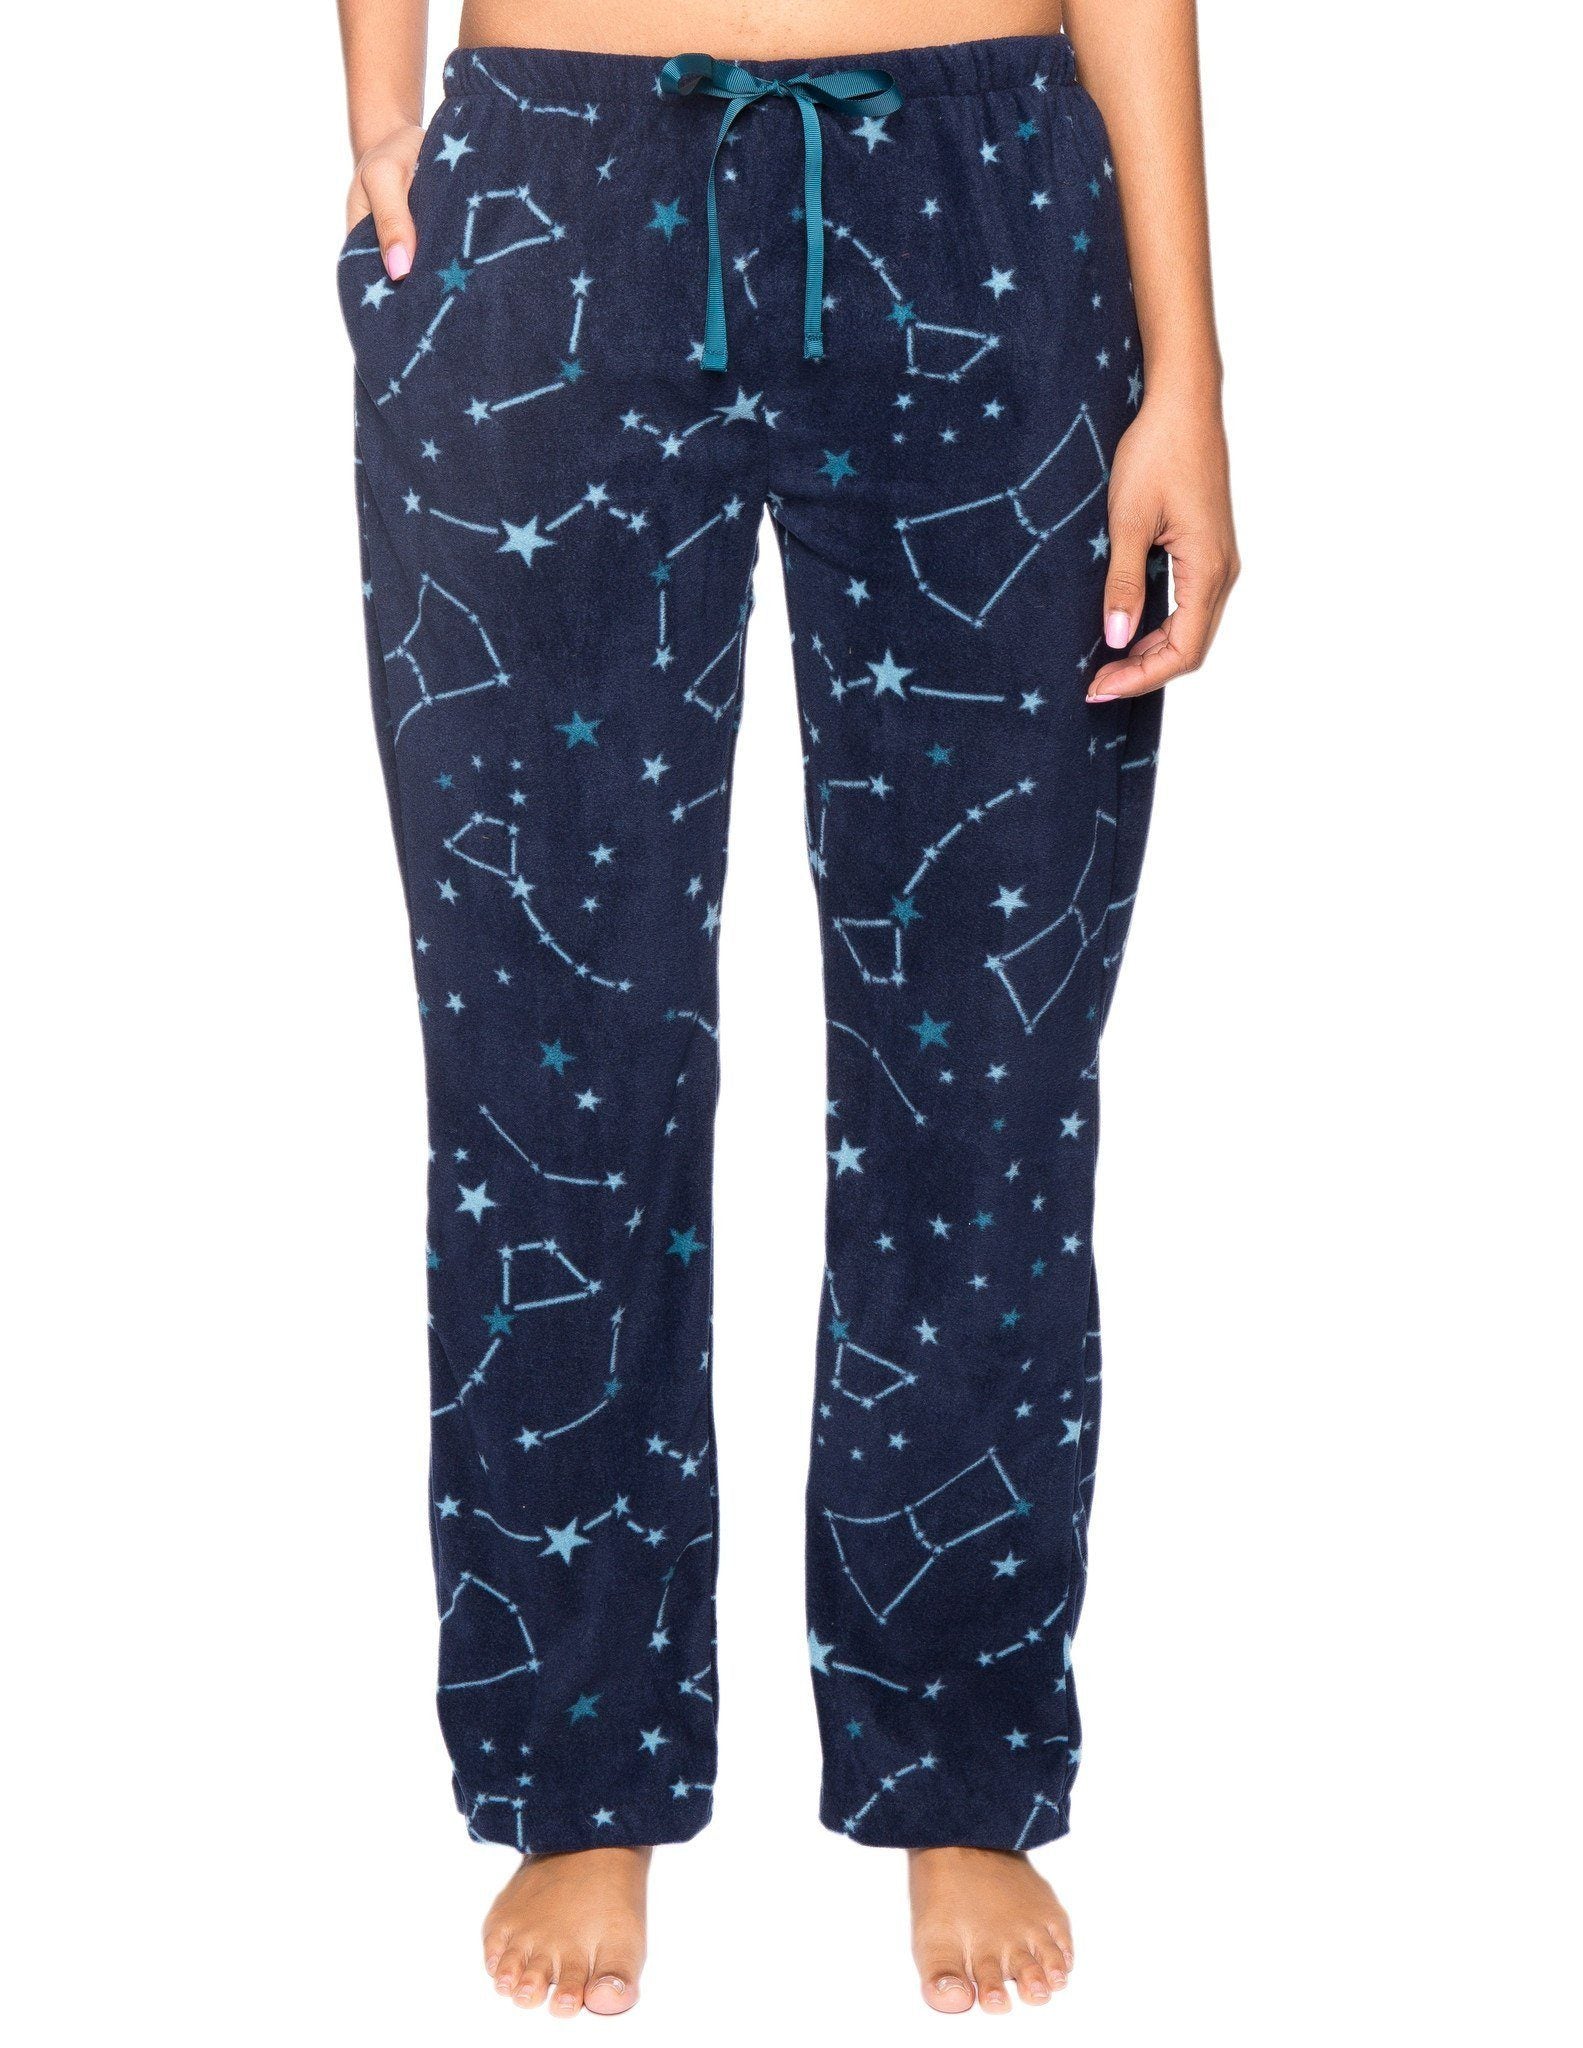 Constellations Navy/Teal